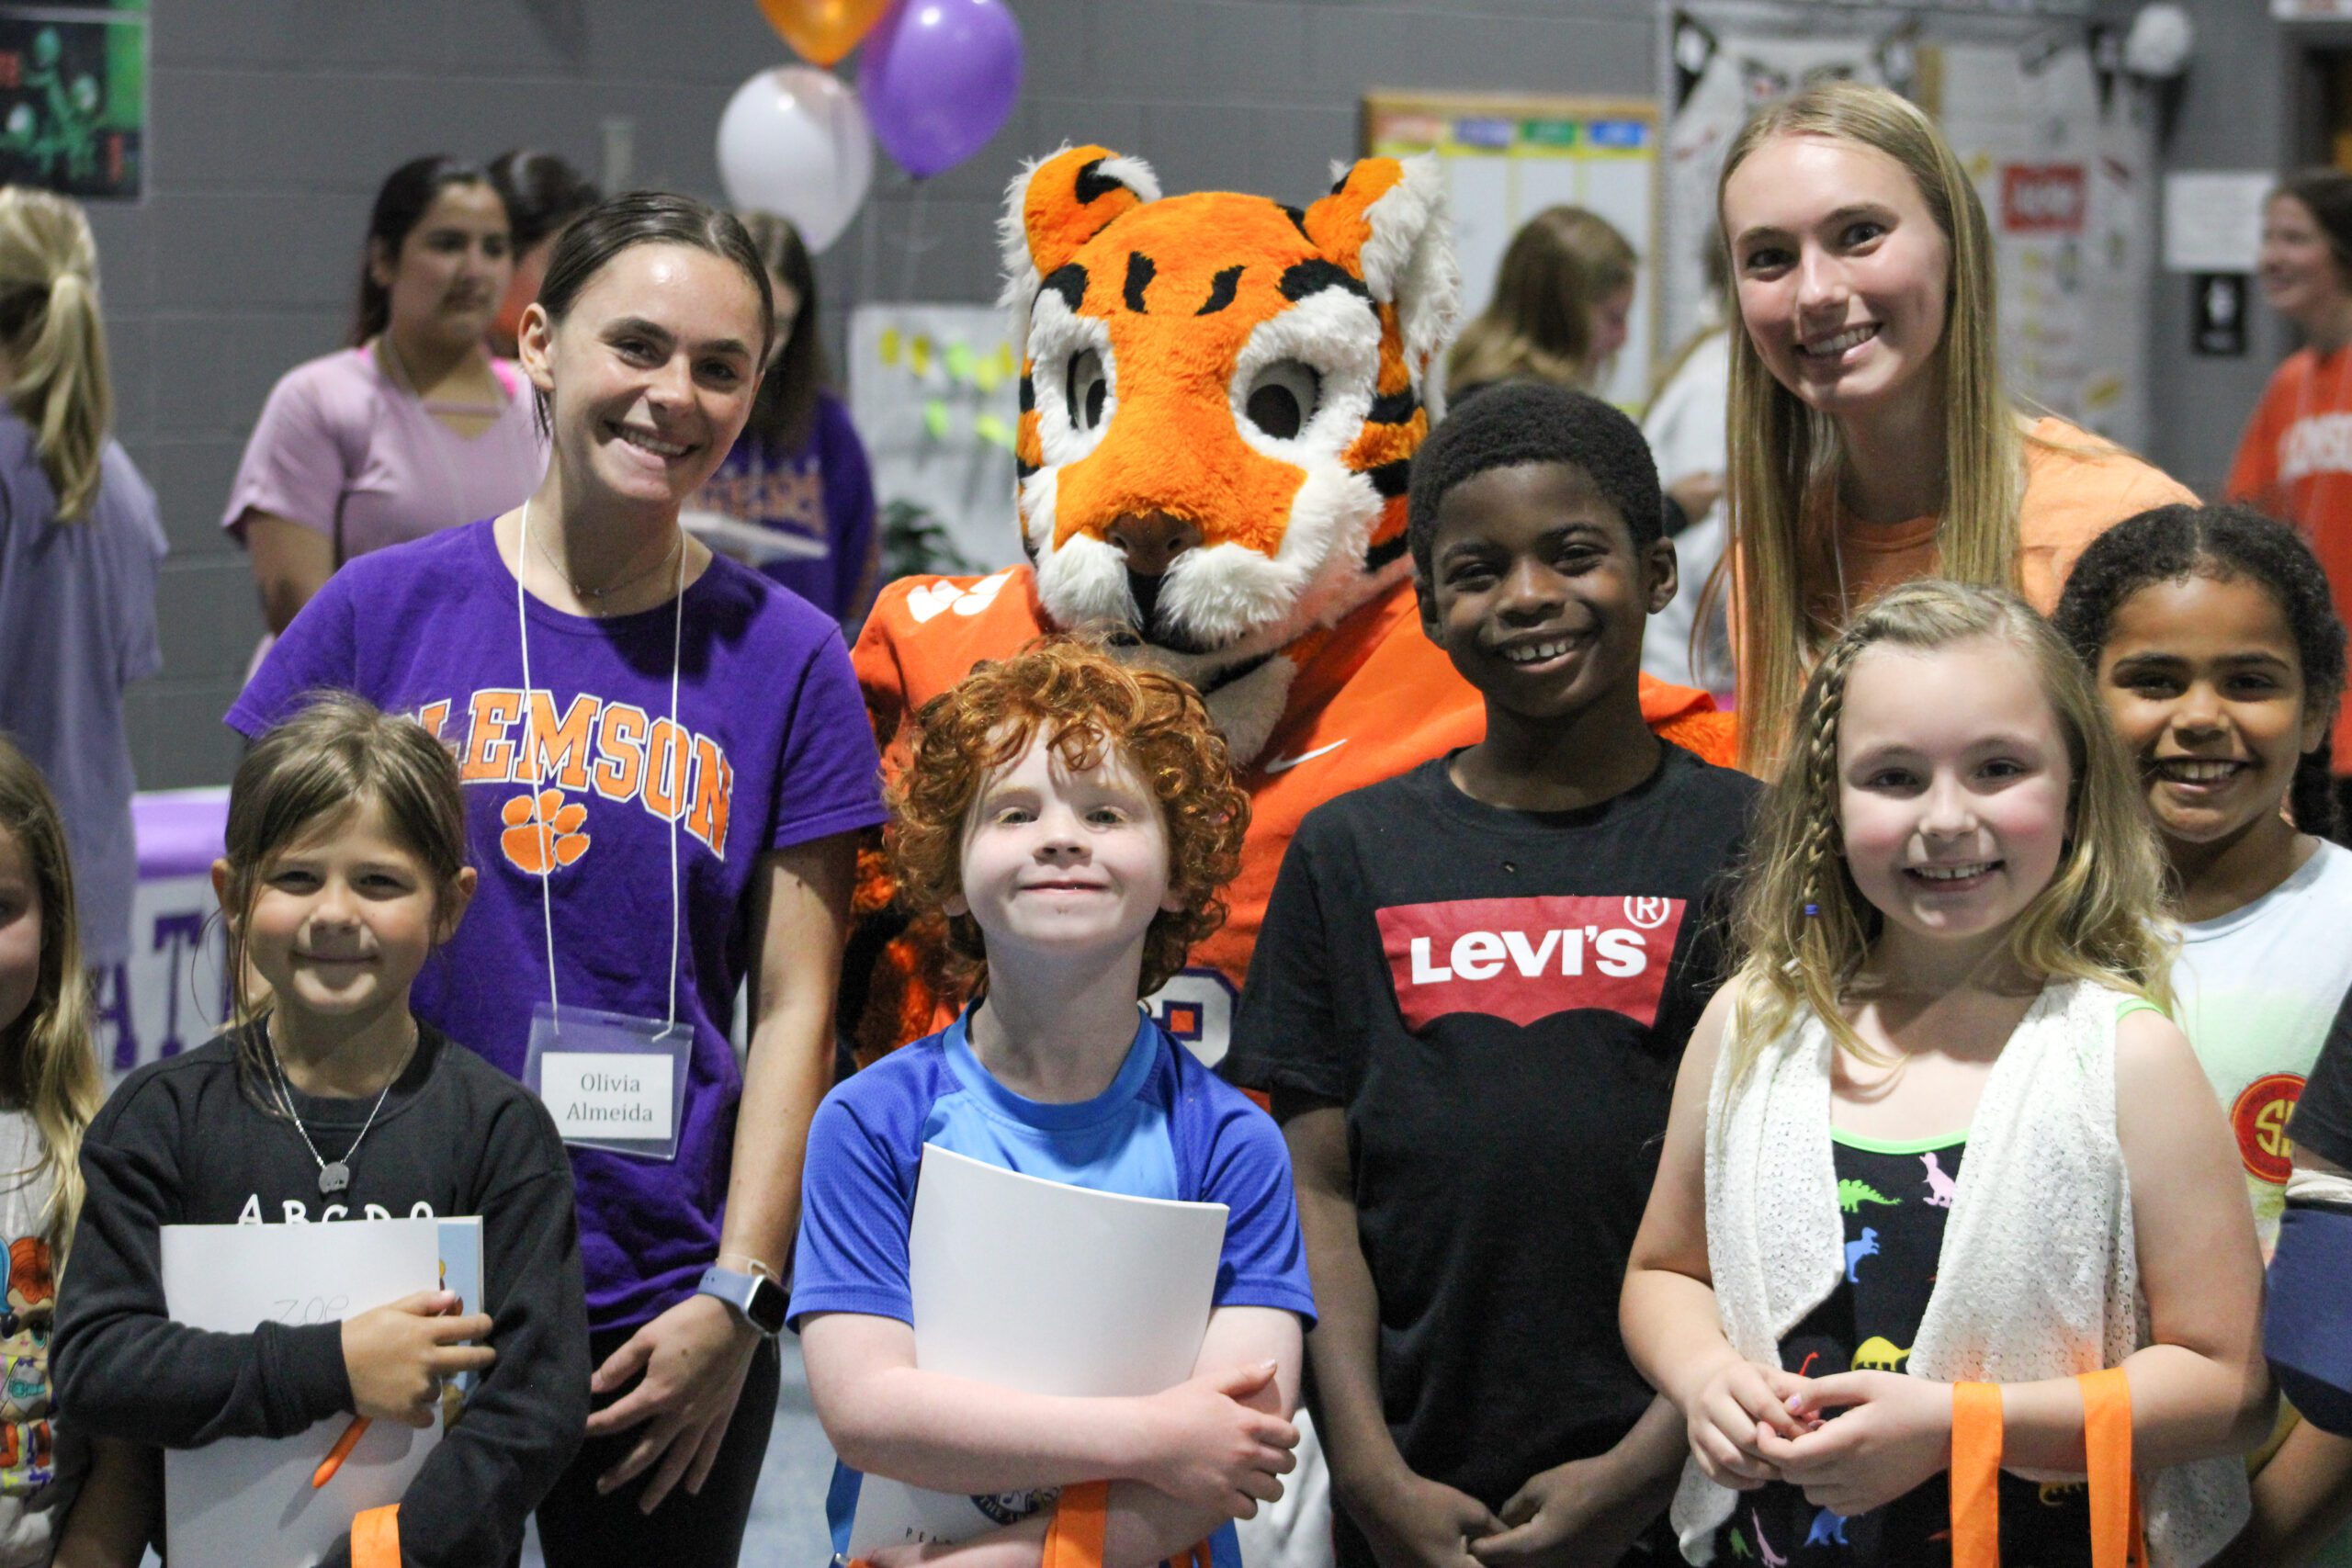 Students from Clemson University's Pearce Center for Professional Communication pose for a photo with elementary students at Central Academy of the Arts and the Clemson Tiger Cub mascot. The children are holding books.